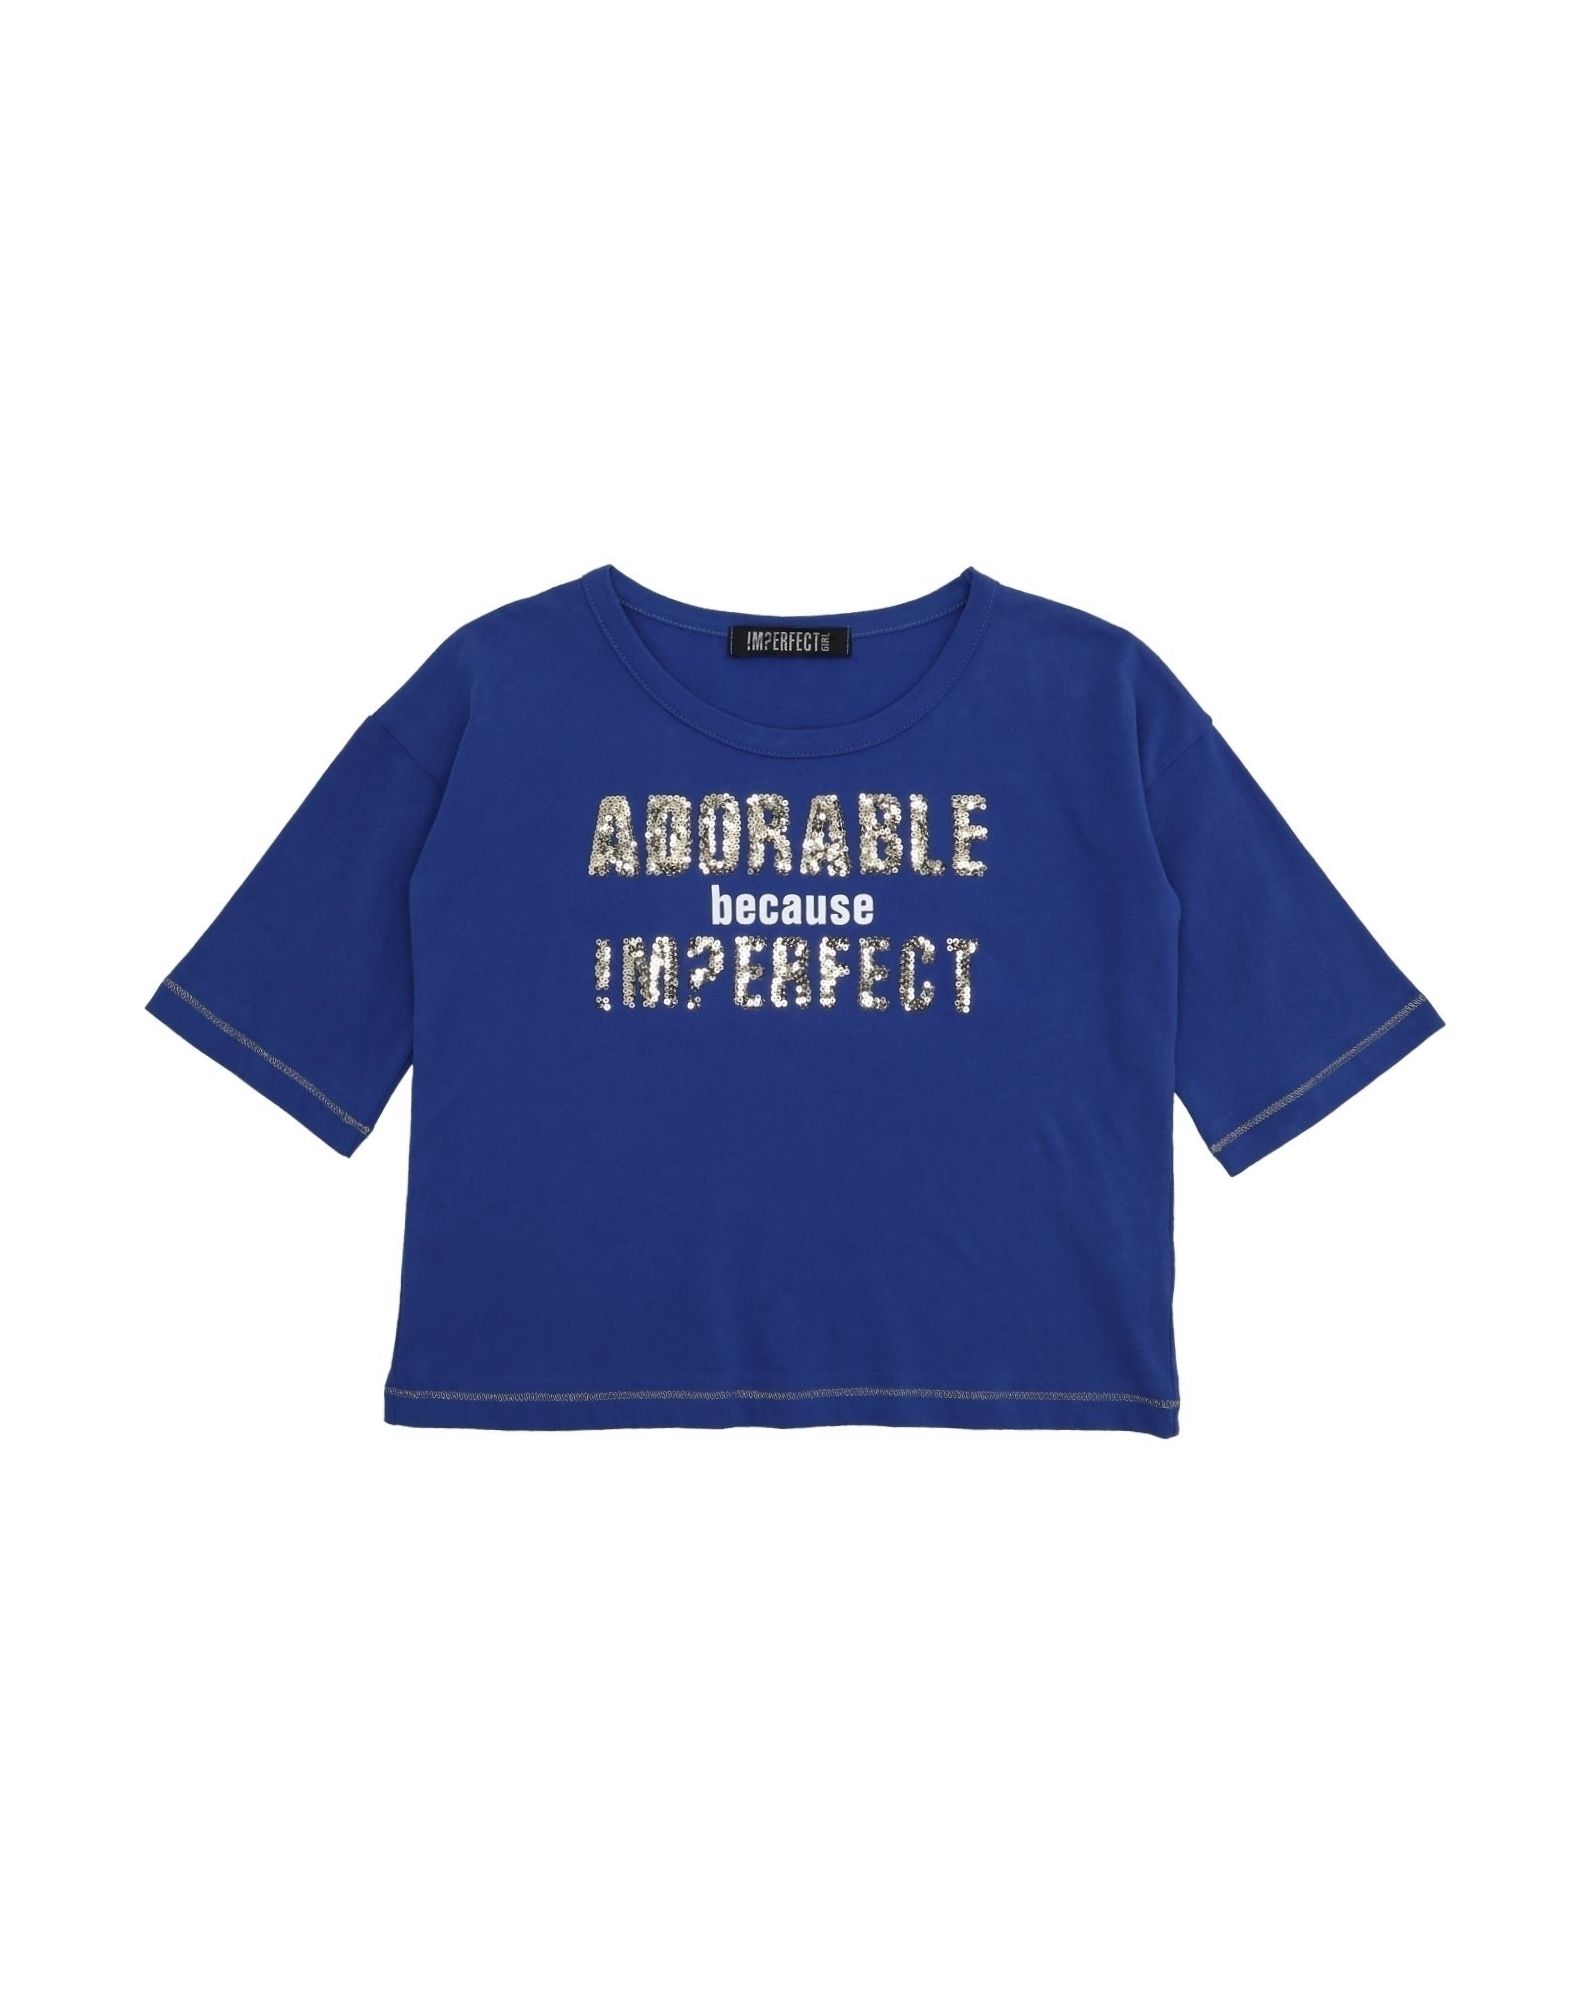 !m?erfect Kids'  T-shirts In Blue